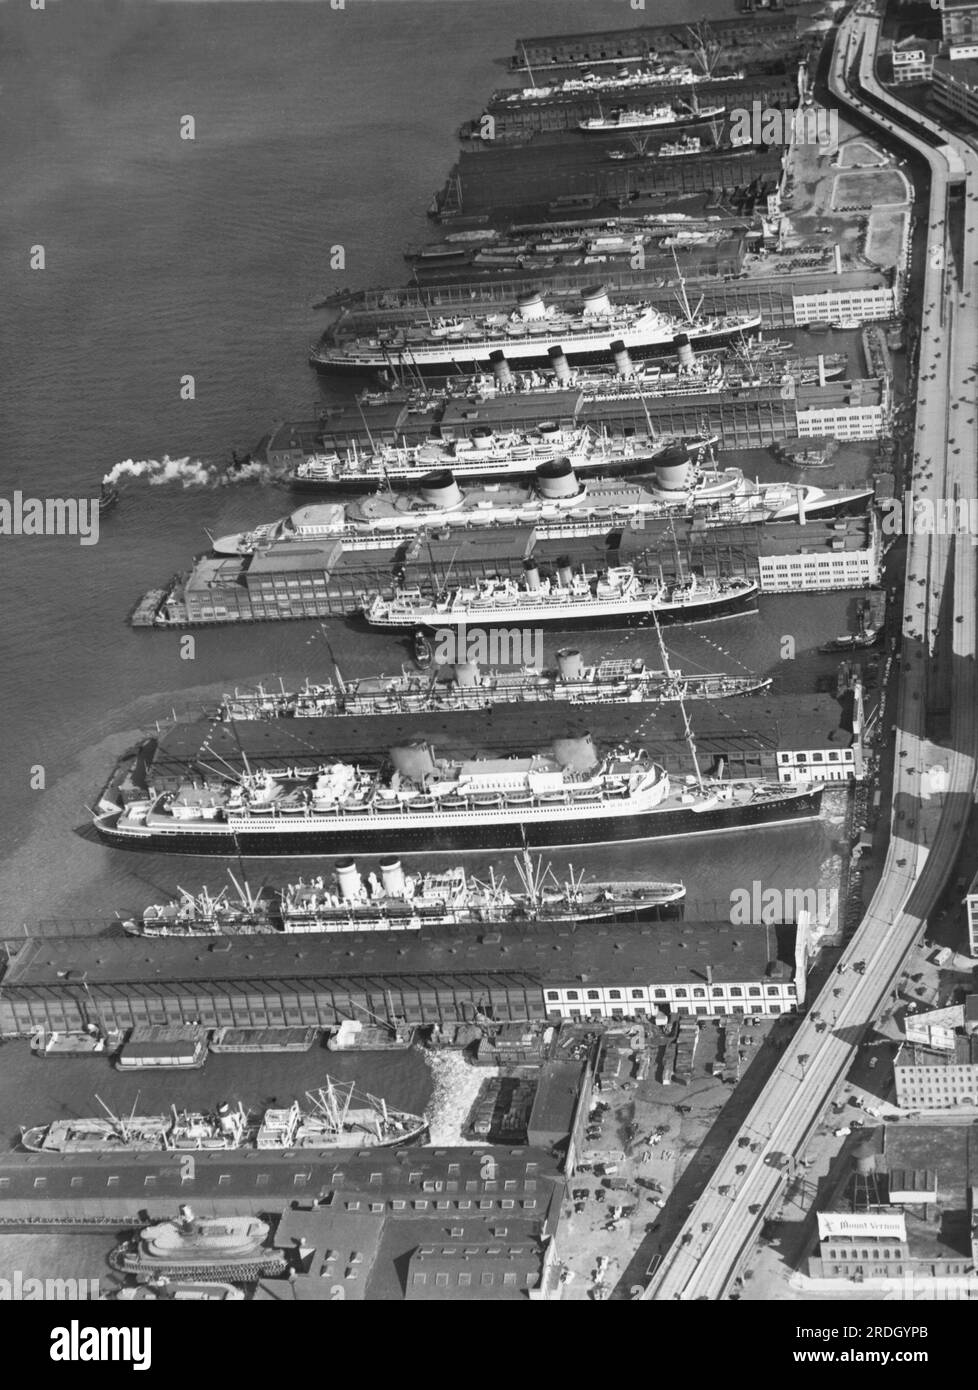 New York, New York:   c. 1932 A lineup of ships in the harbor. Near the center are the passenger liners, 'SS Normandie' and SS Bremen'. Stock Photo